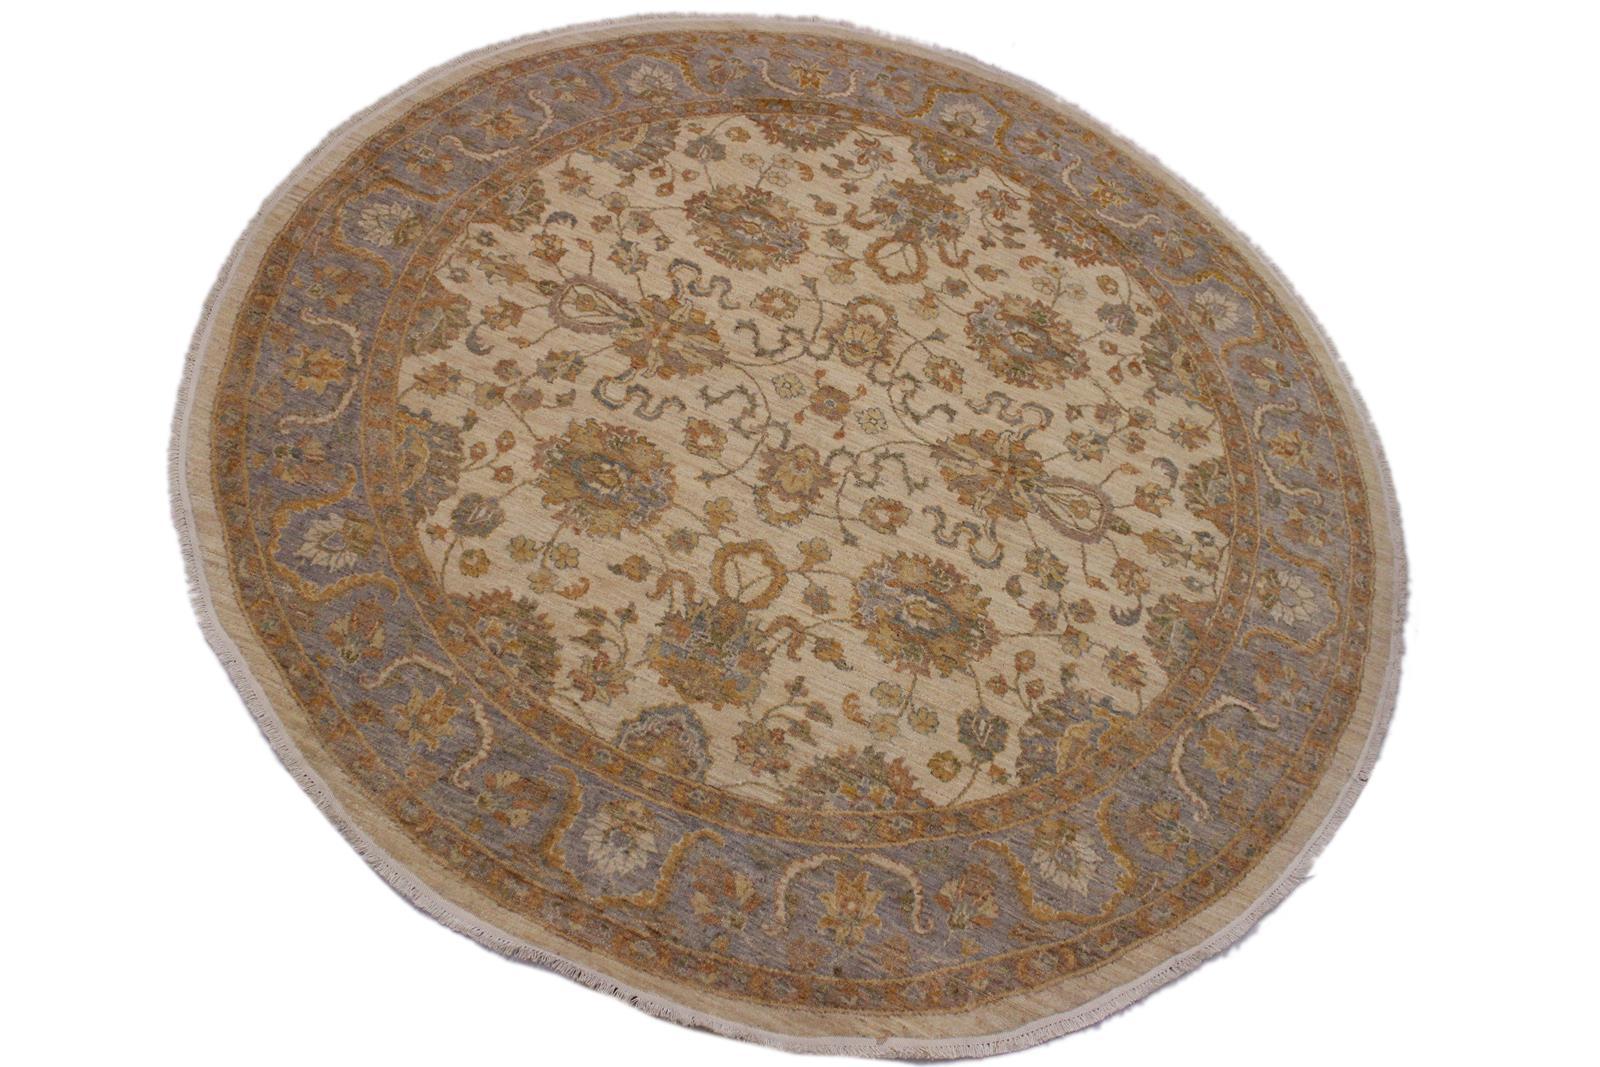 A11783 711"x 8 1"Traditional                   8x8NaturalGREYHand-knotted                  Pakistan   100% Wool  Round      652671215254